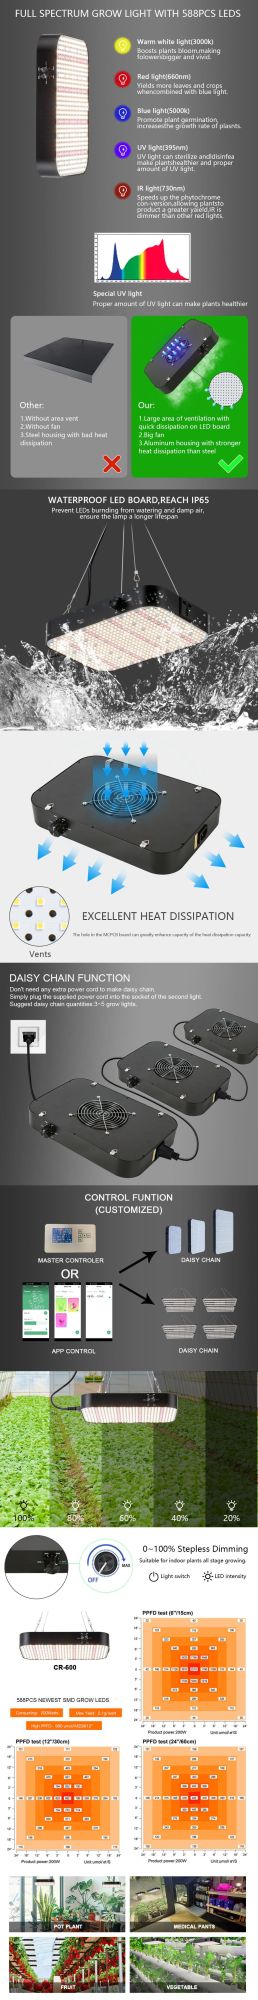 60W Aluminum Full Spectrum Grow Lighting for Indoor Hydroponic Greenhouse Plants Veg and Flowers with Double Switch, Daisy Chain, Adjustable Rope Hanger